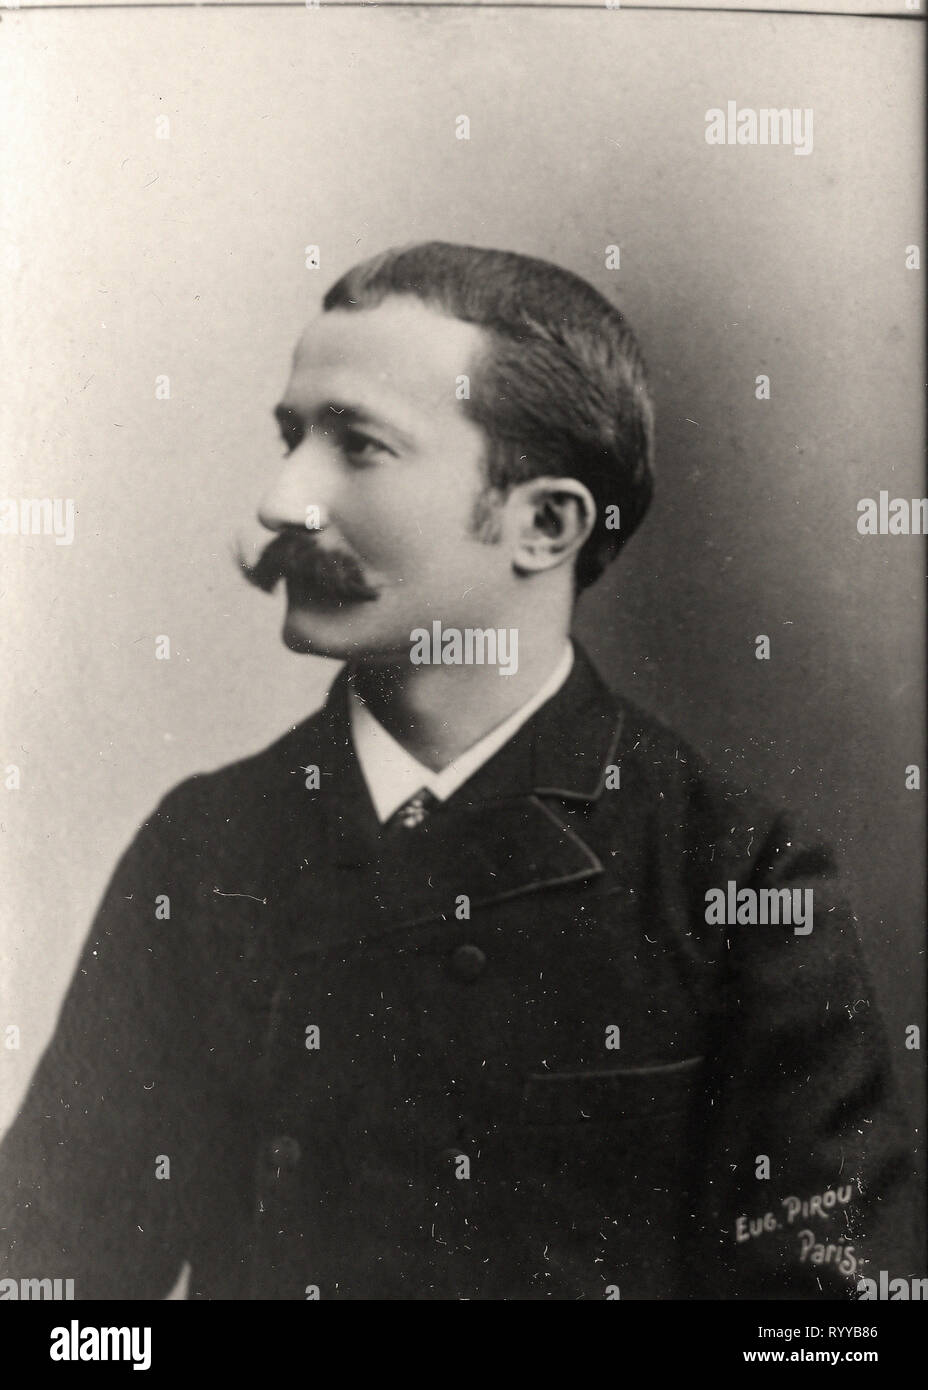 Photographic Portrait Of Ganne   From Collection Félix Potin, Early 20th Century Stock Photo